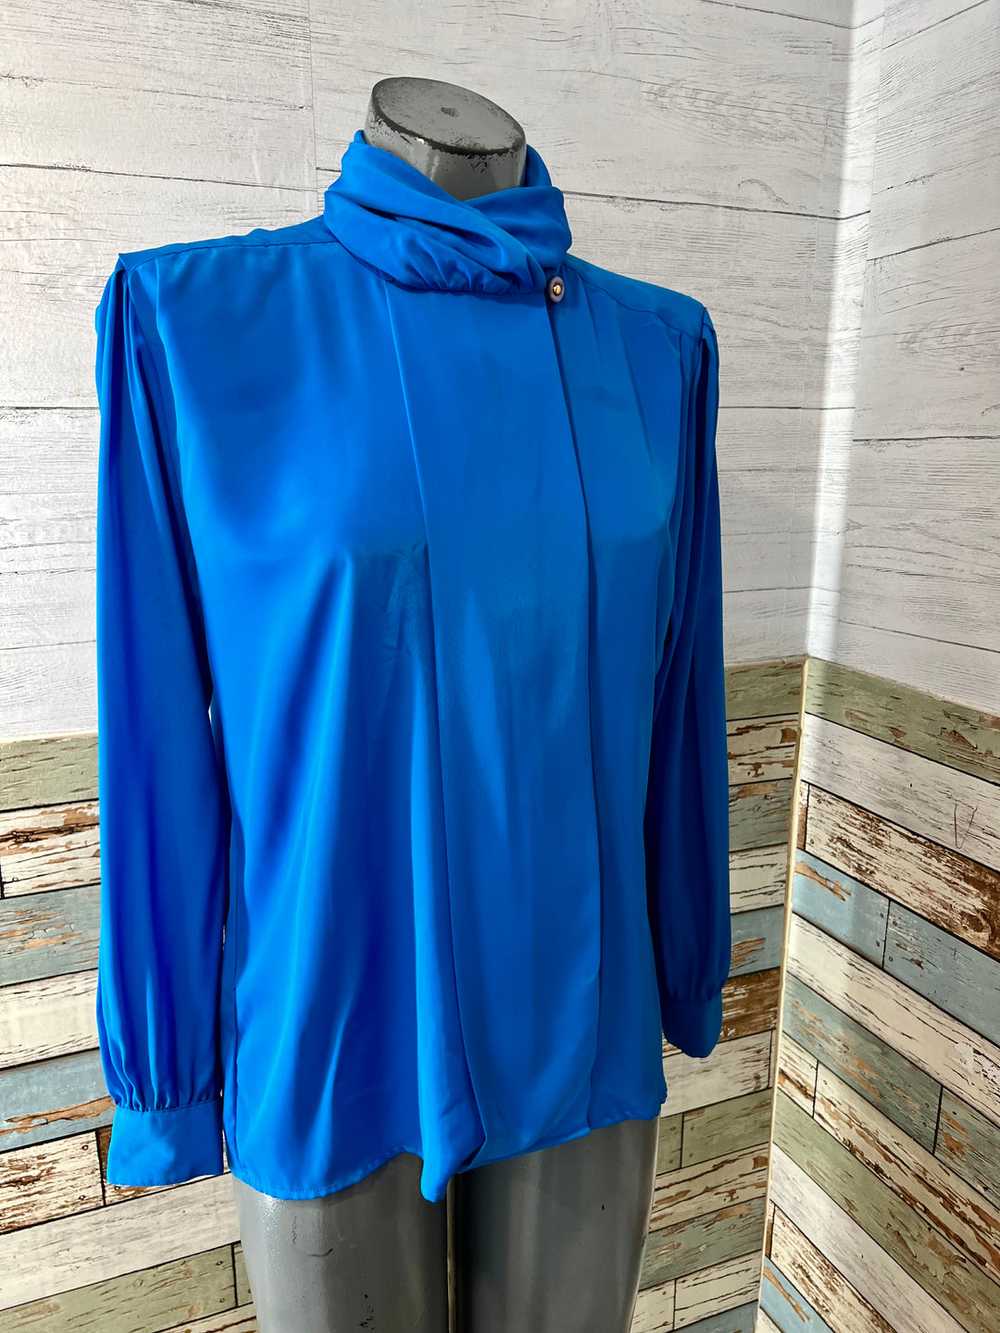 80’s Electric Blue High Neck Blouse - image 2